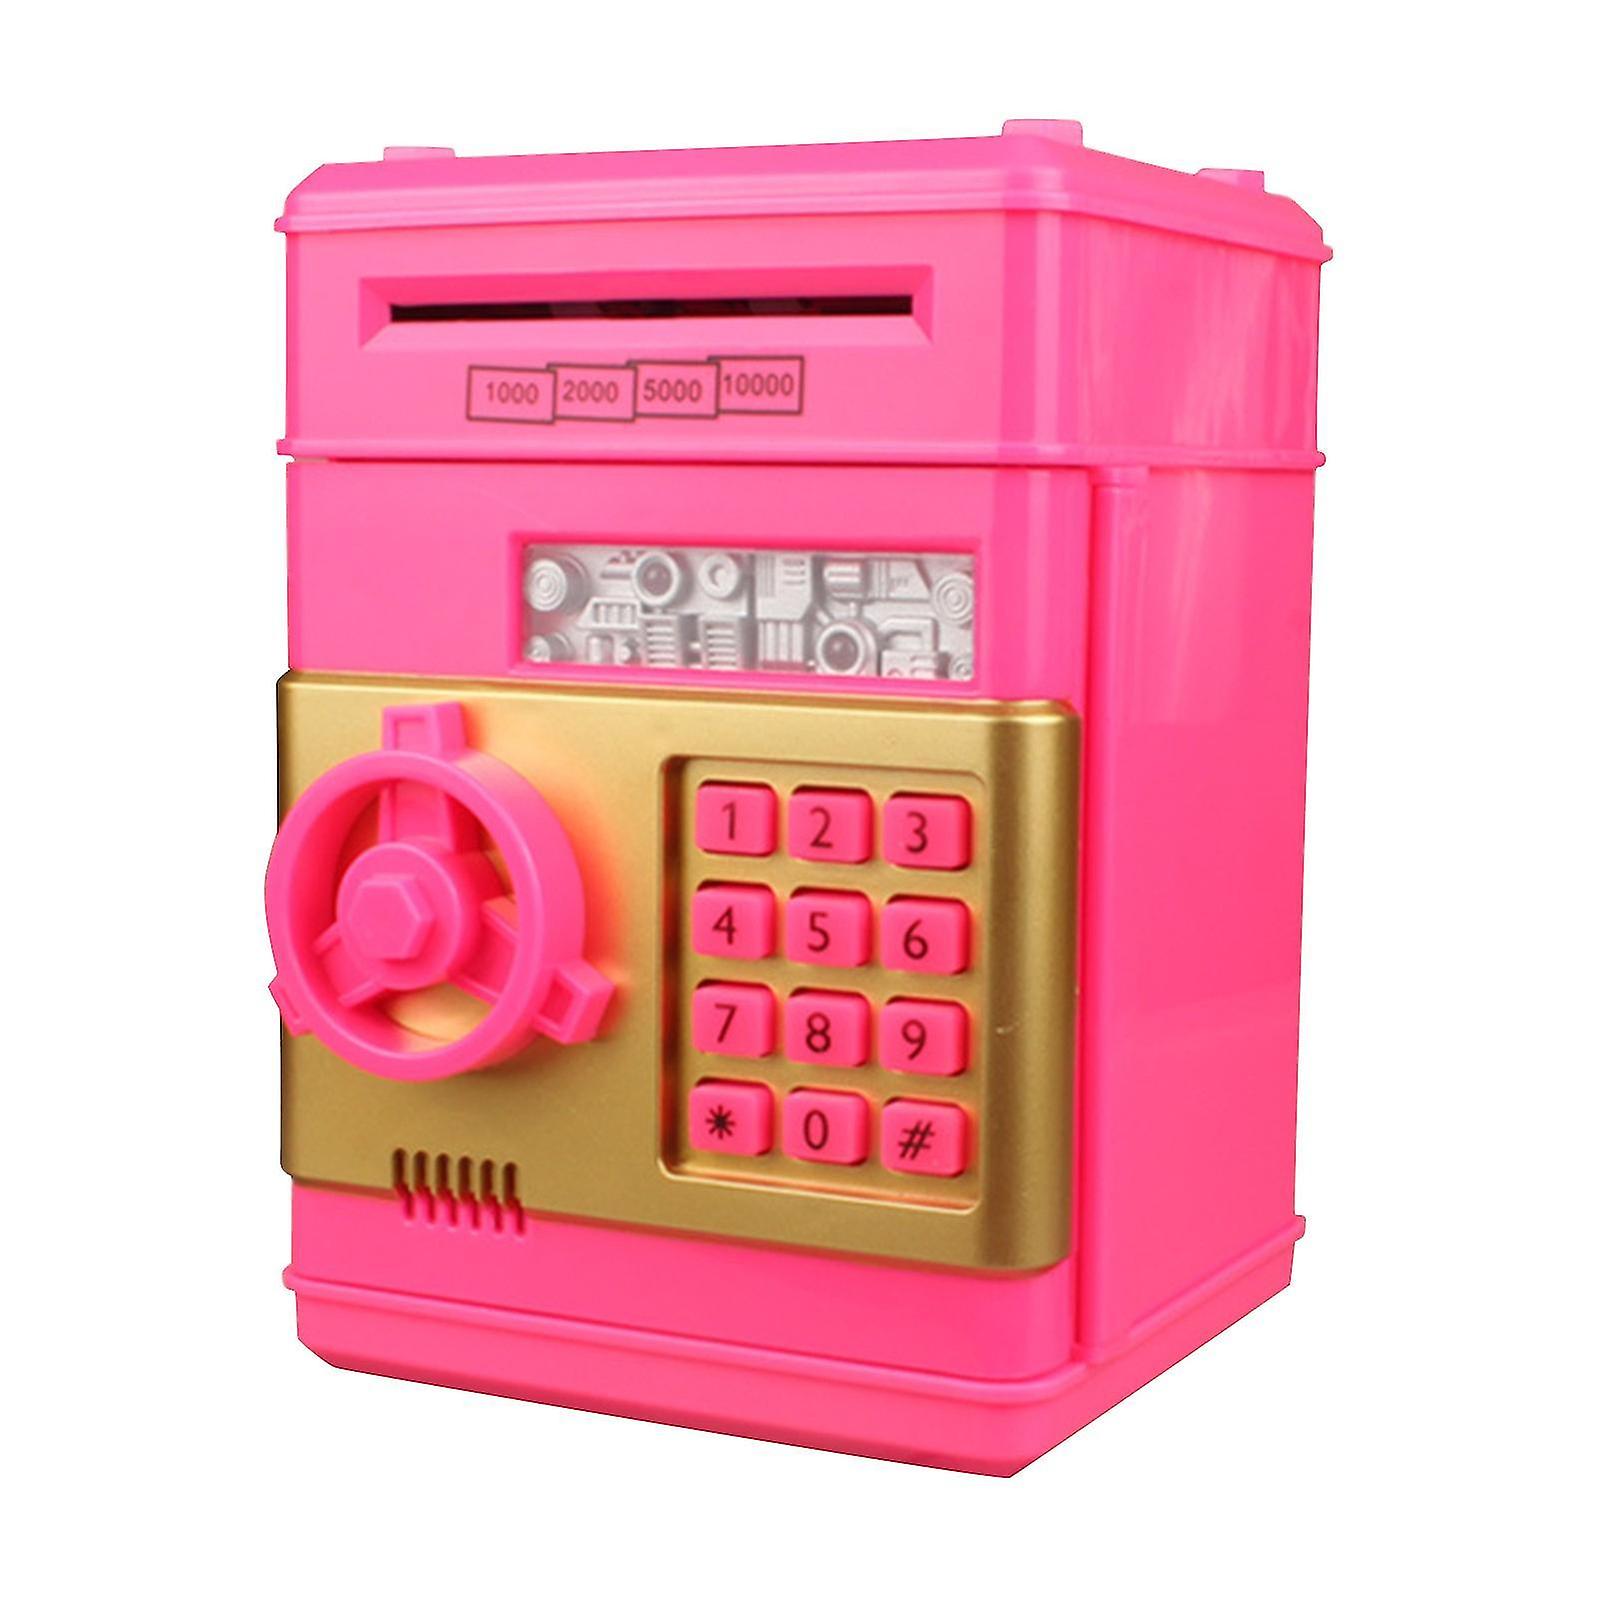 Atm Piggy Bank Mini Electronic Password Money Box Safety Chewing Cash Coins Saving Box Automatic Deposit Banknote Kids Toys Gift